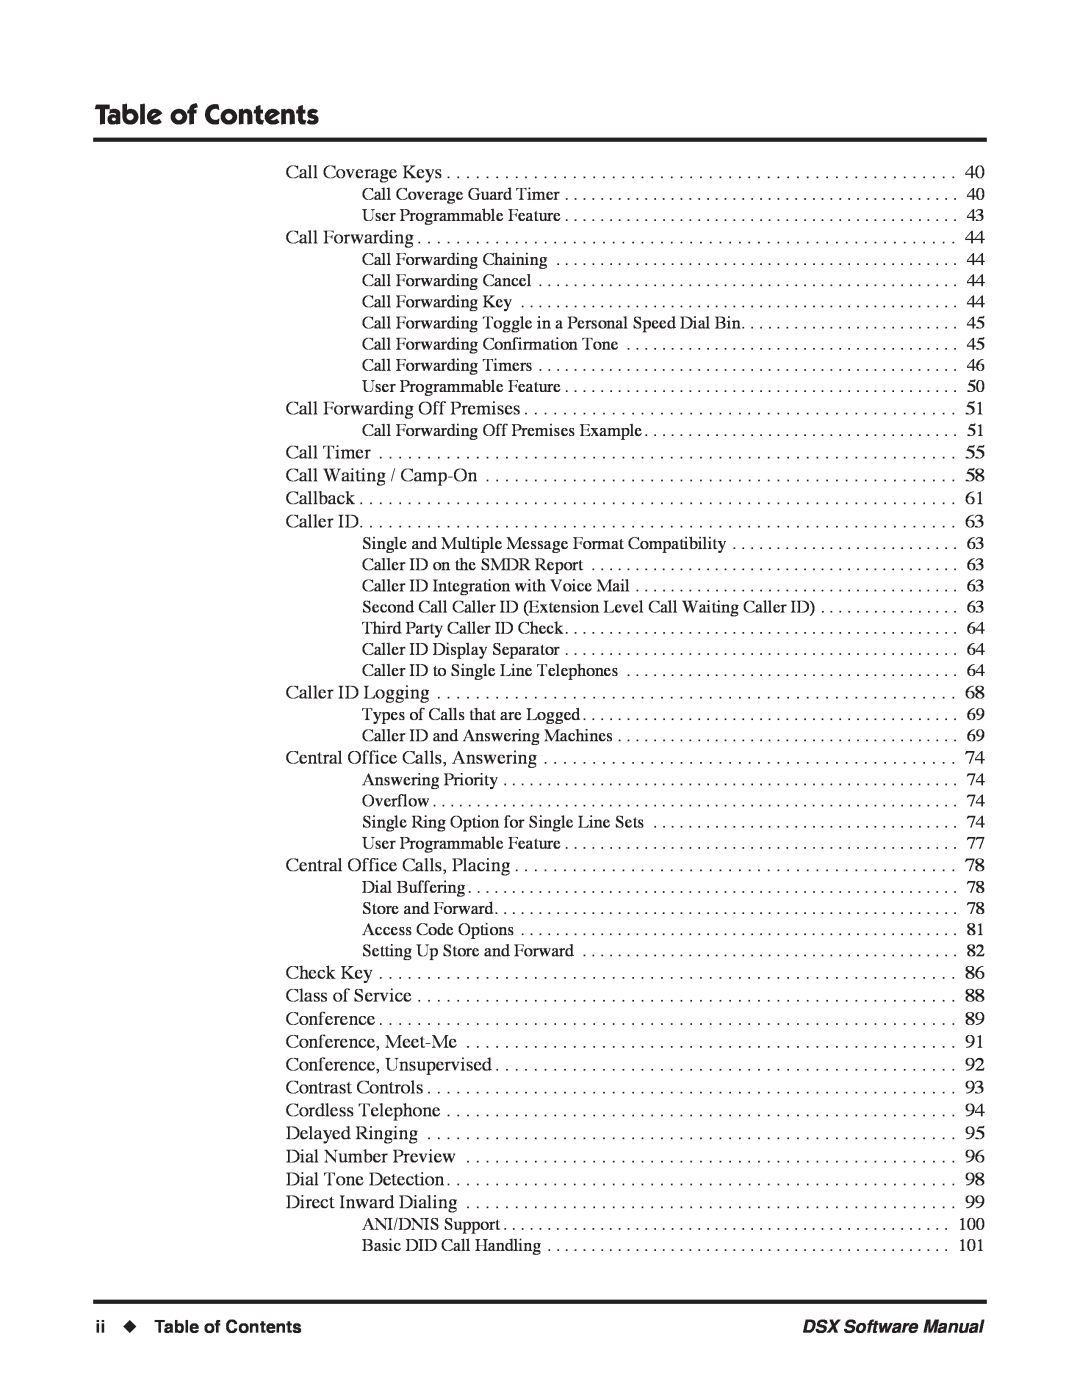 NEC N 1093100, P software manual ii Table of Contents 